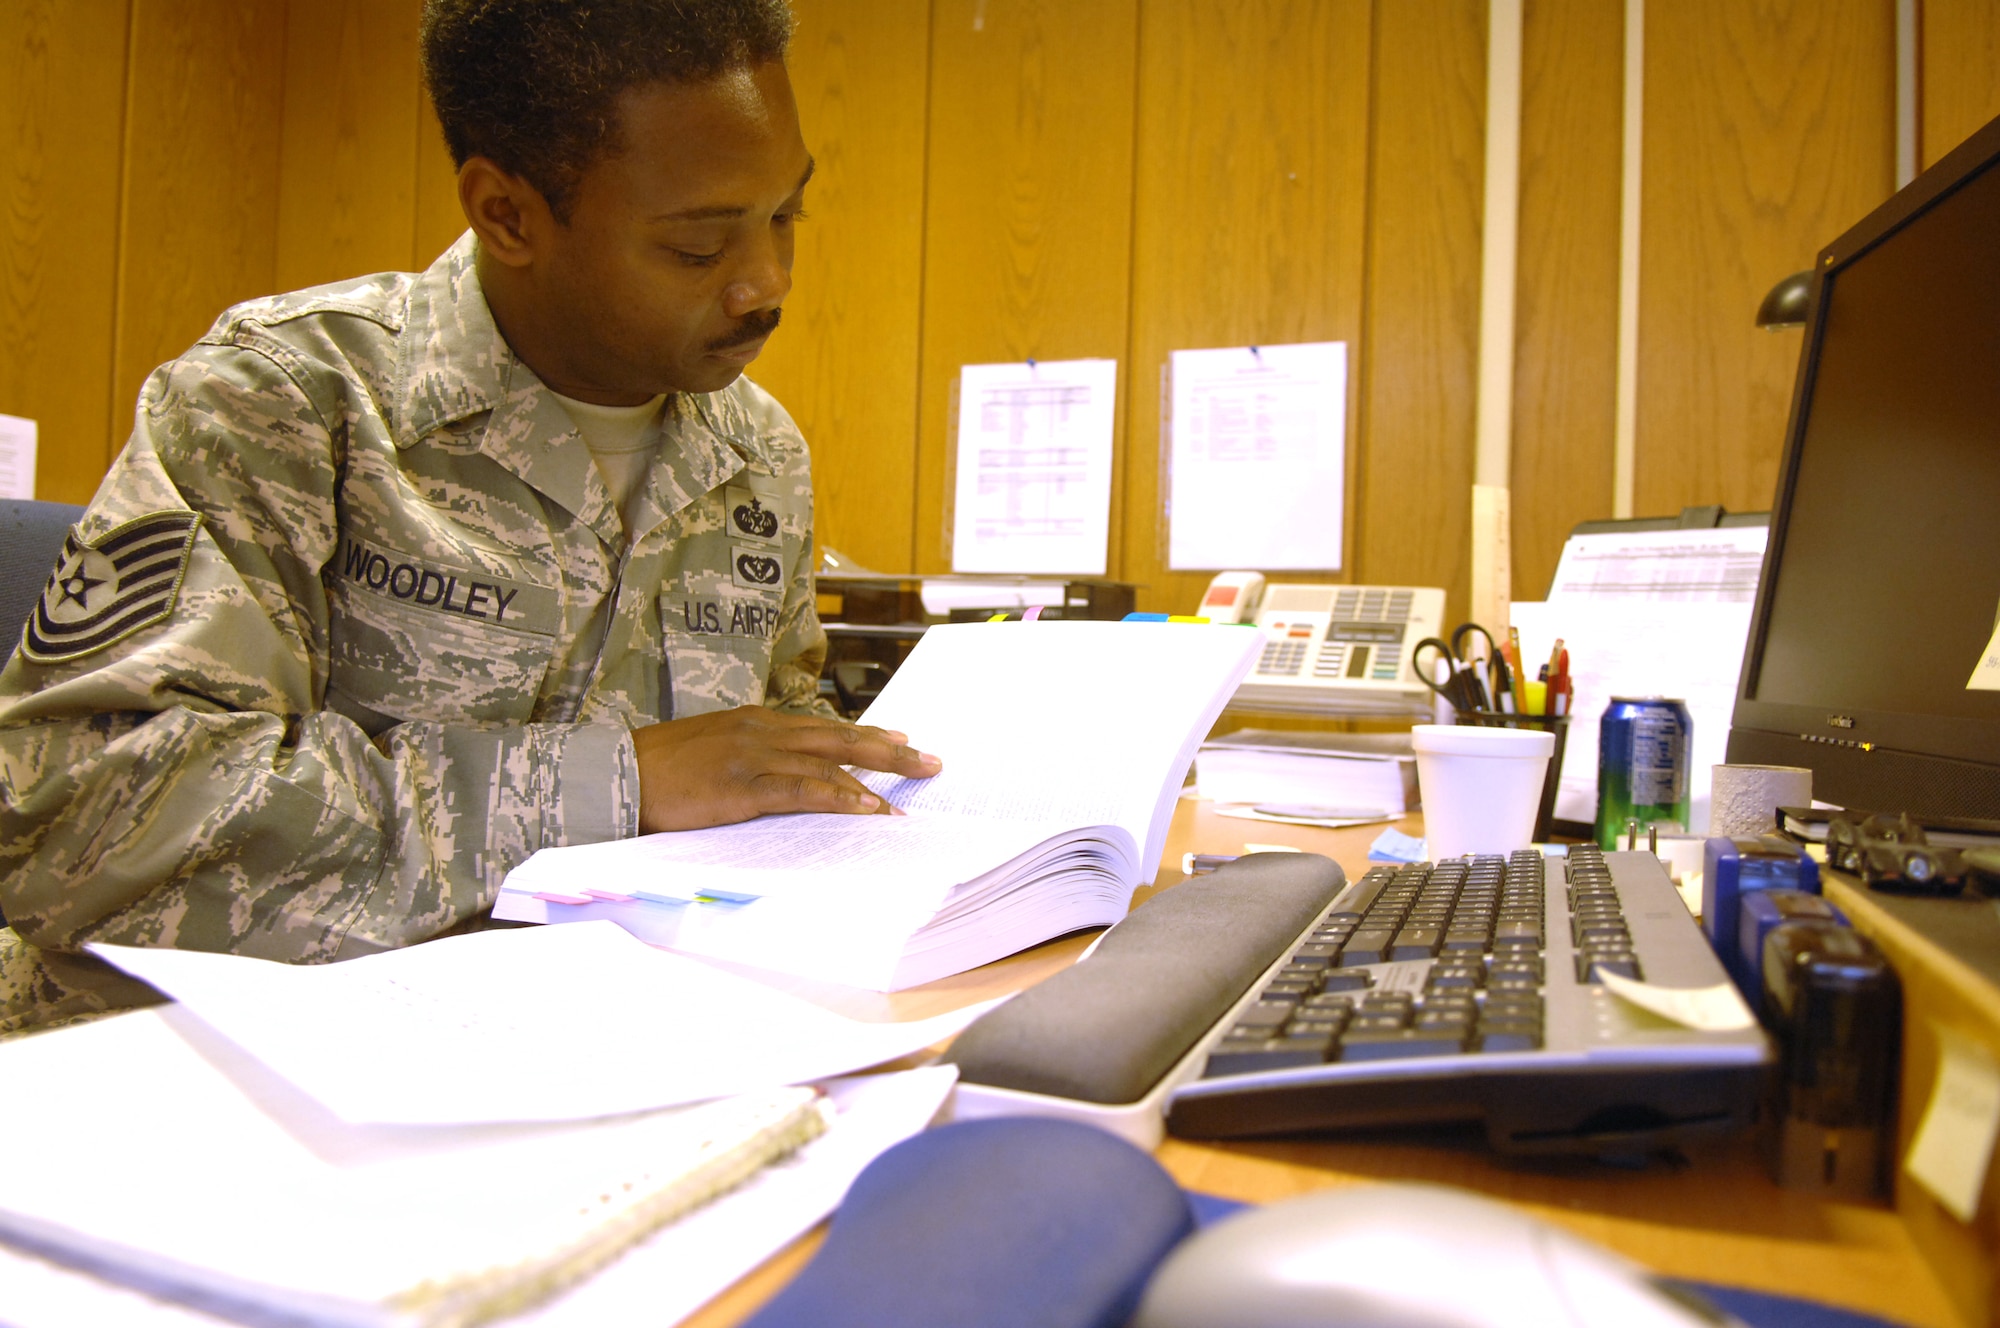 ech. Sgt. Corey Woodley, an Air Force paralegal reservist instructor, reviews the Manual for Courts-Martial for information concerning a case. Sergeant Woodley, a reserve instructor at the Air Force Judge Advocate General’s School, is currently TDY to Ramstein assisting with UCI preparation.  Paralegals often find themselves doing research for cases in military justice, claims, or other areas of law. (Air Force photo by Tech. Sgt. Michael Voss)